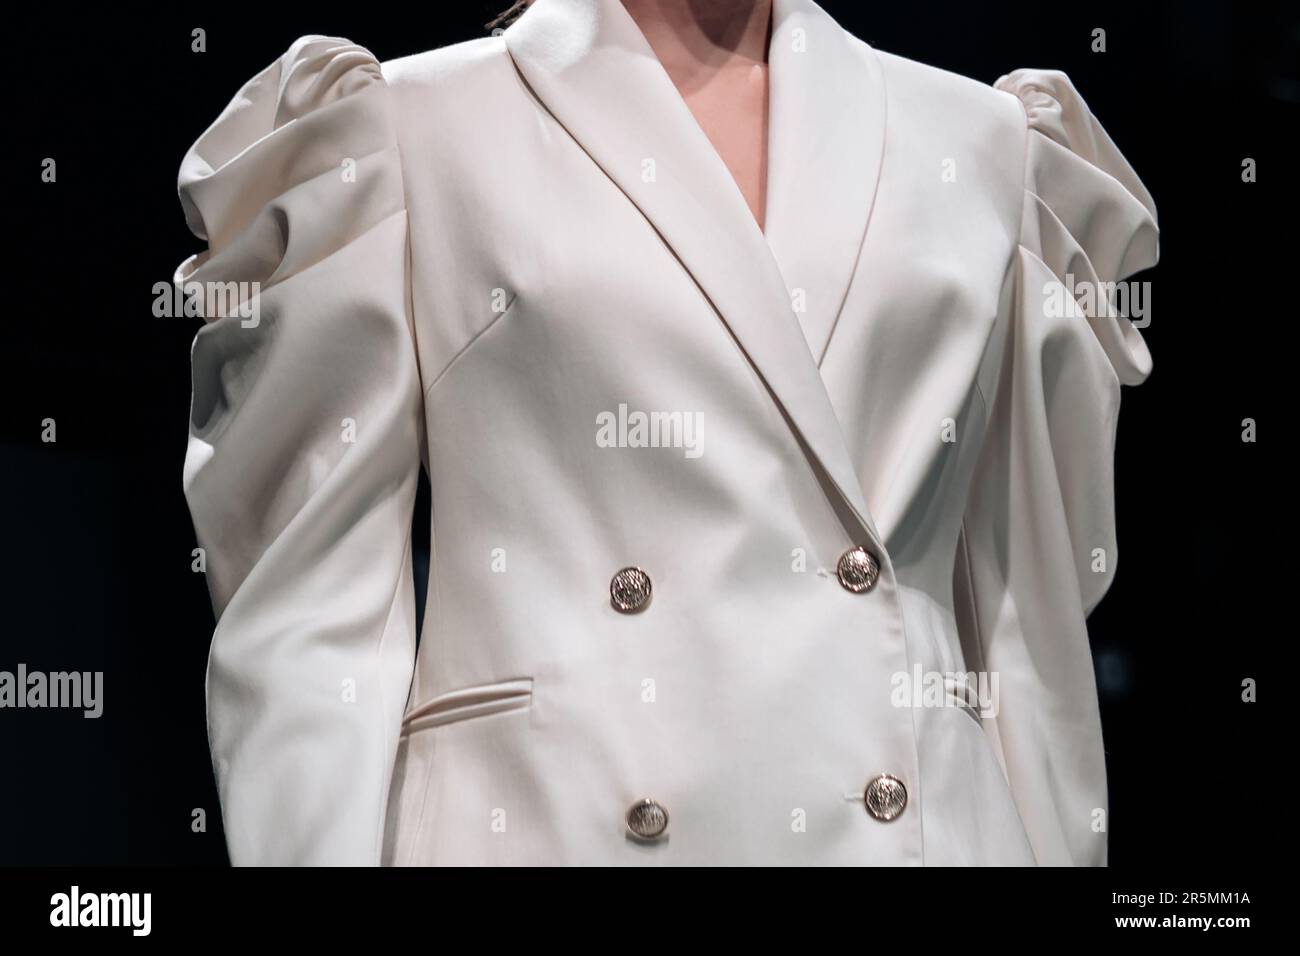 Classy white jacket with buttons on female body. Fashion fancy details. Style, design of women's clothing and accessories. Stock Photo